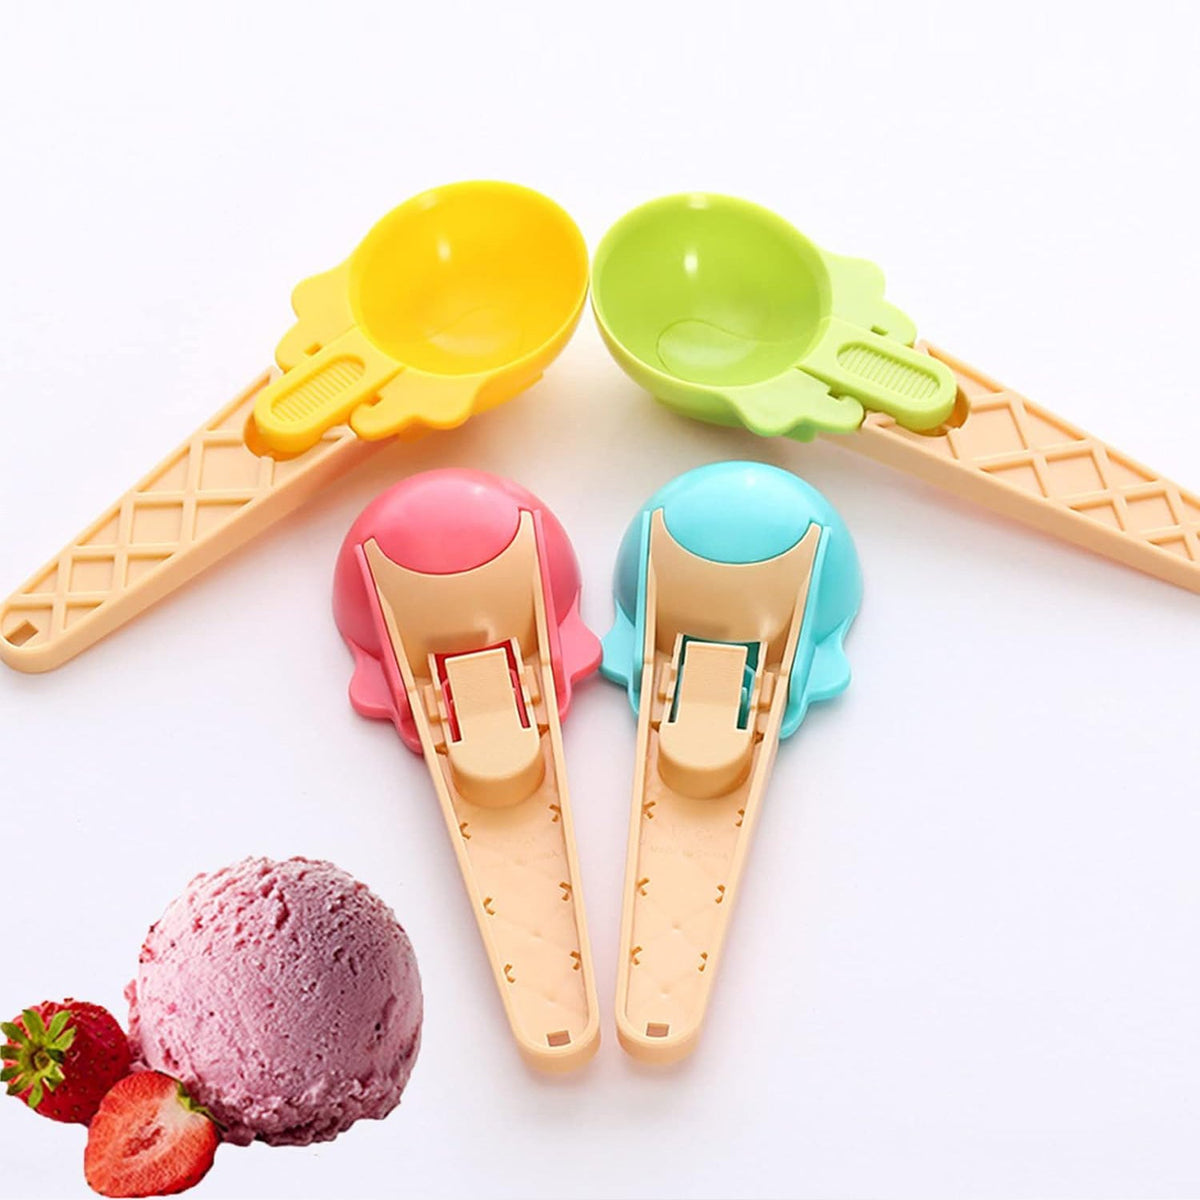 5509 Ice Cream Spoons 2pcs Plastic Water Melon Scoopers with Trigger Dipper and Adults for Summer Party Ice Cream Scoop, Food Serving Spoon Kitchen Tools Ice Cream Digging Spoon Household Spoons Cupcake Spoons Aps Fruit Ball Player (2 Pc)